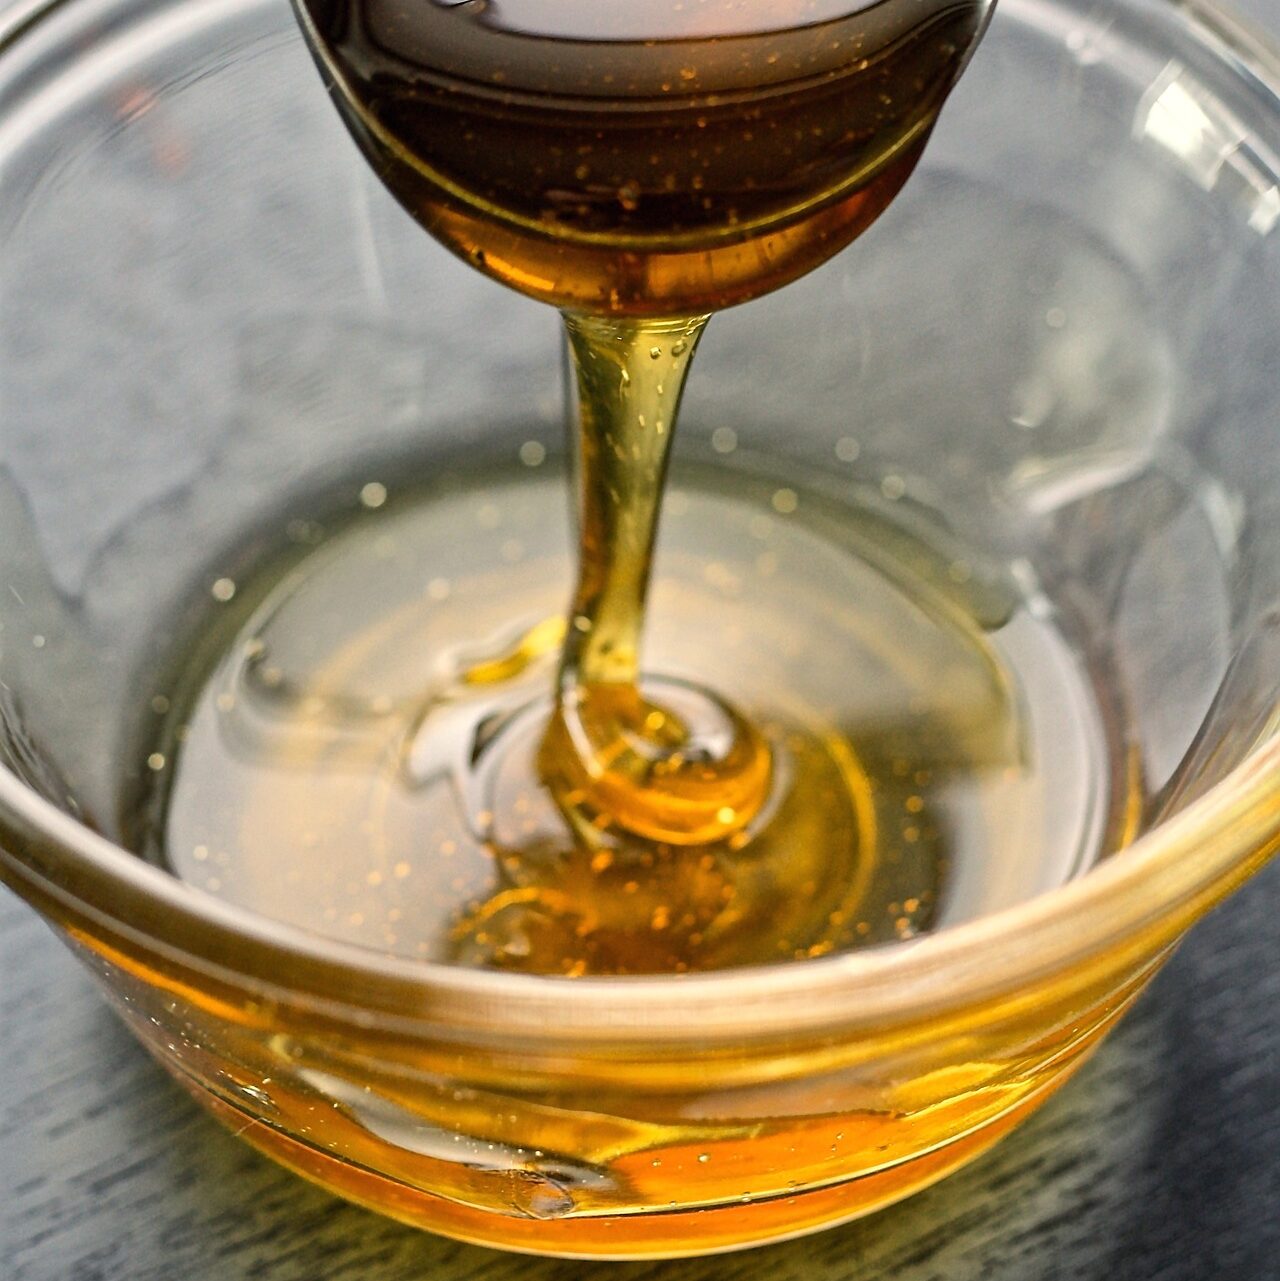 Small glass bowl of honey with spoon drizzling honey into bowl